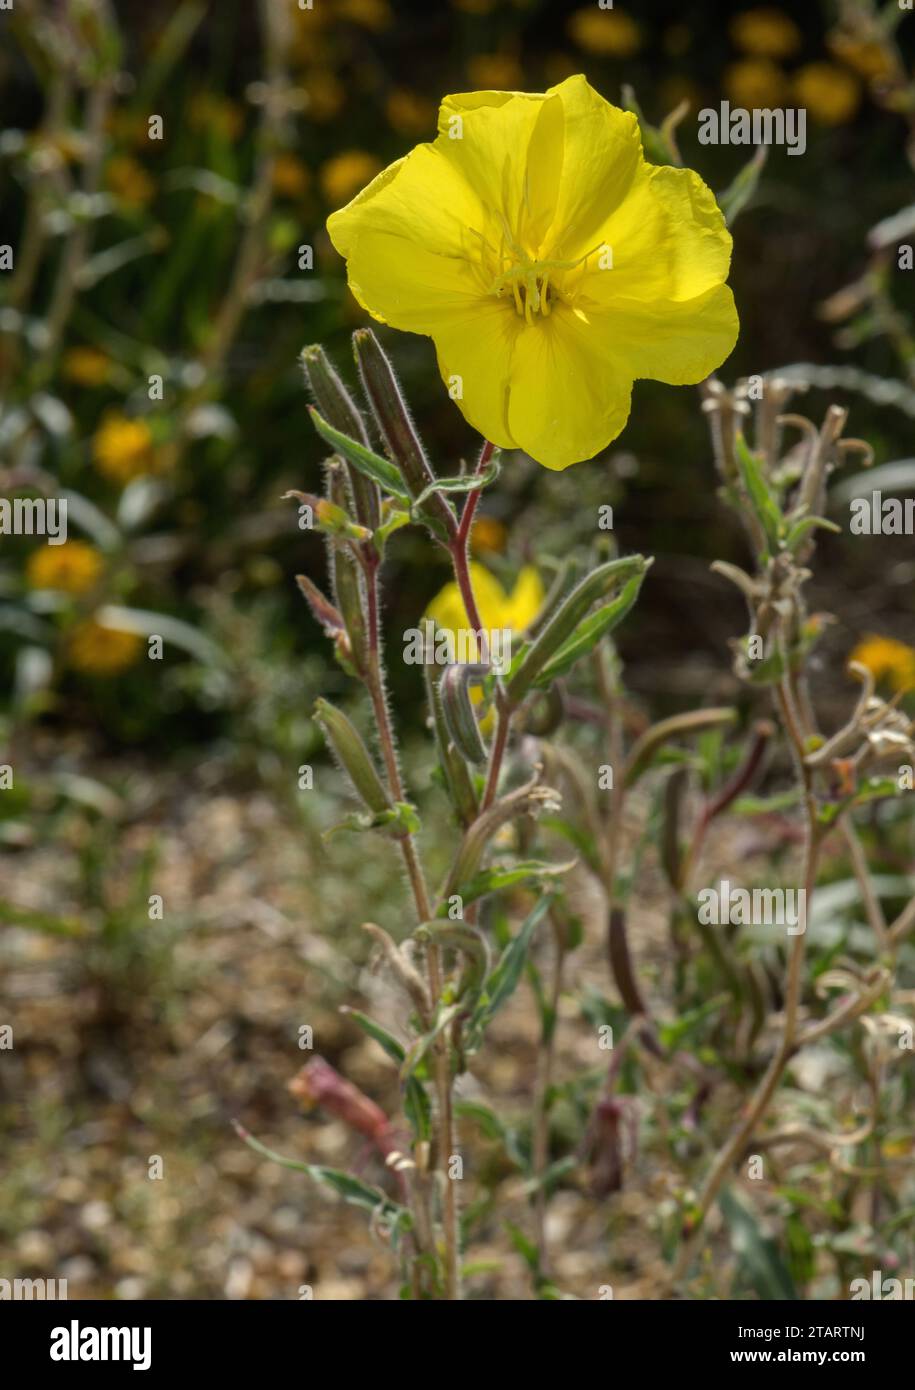 An Evening Primrose, Oenothera magellanica in flower, from South America. Stock Photo